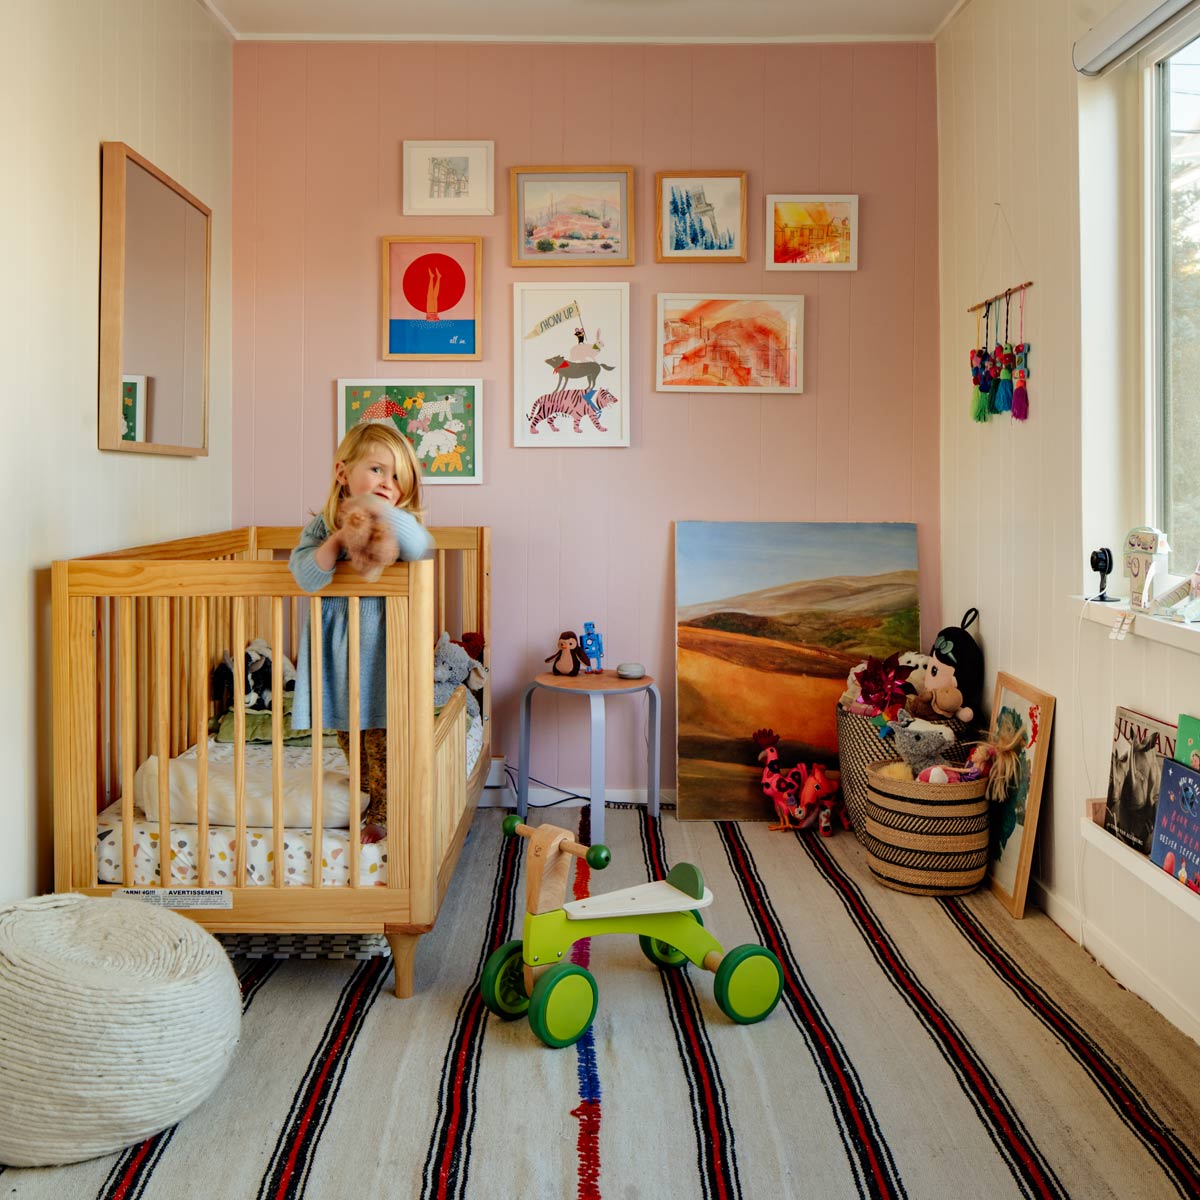 Small child standing in her cot in pink bedroom